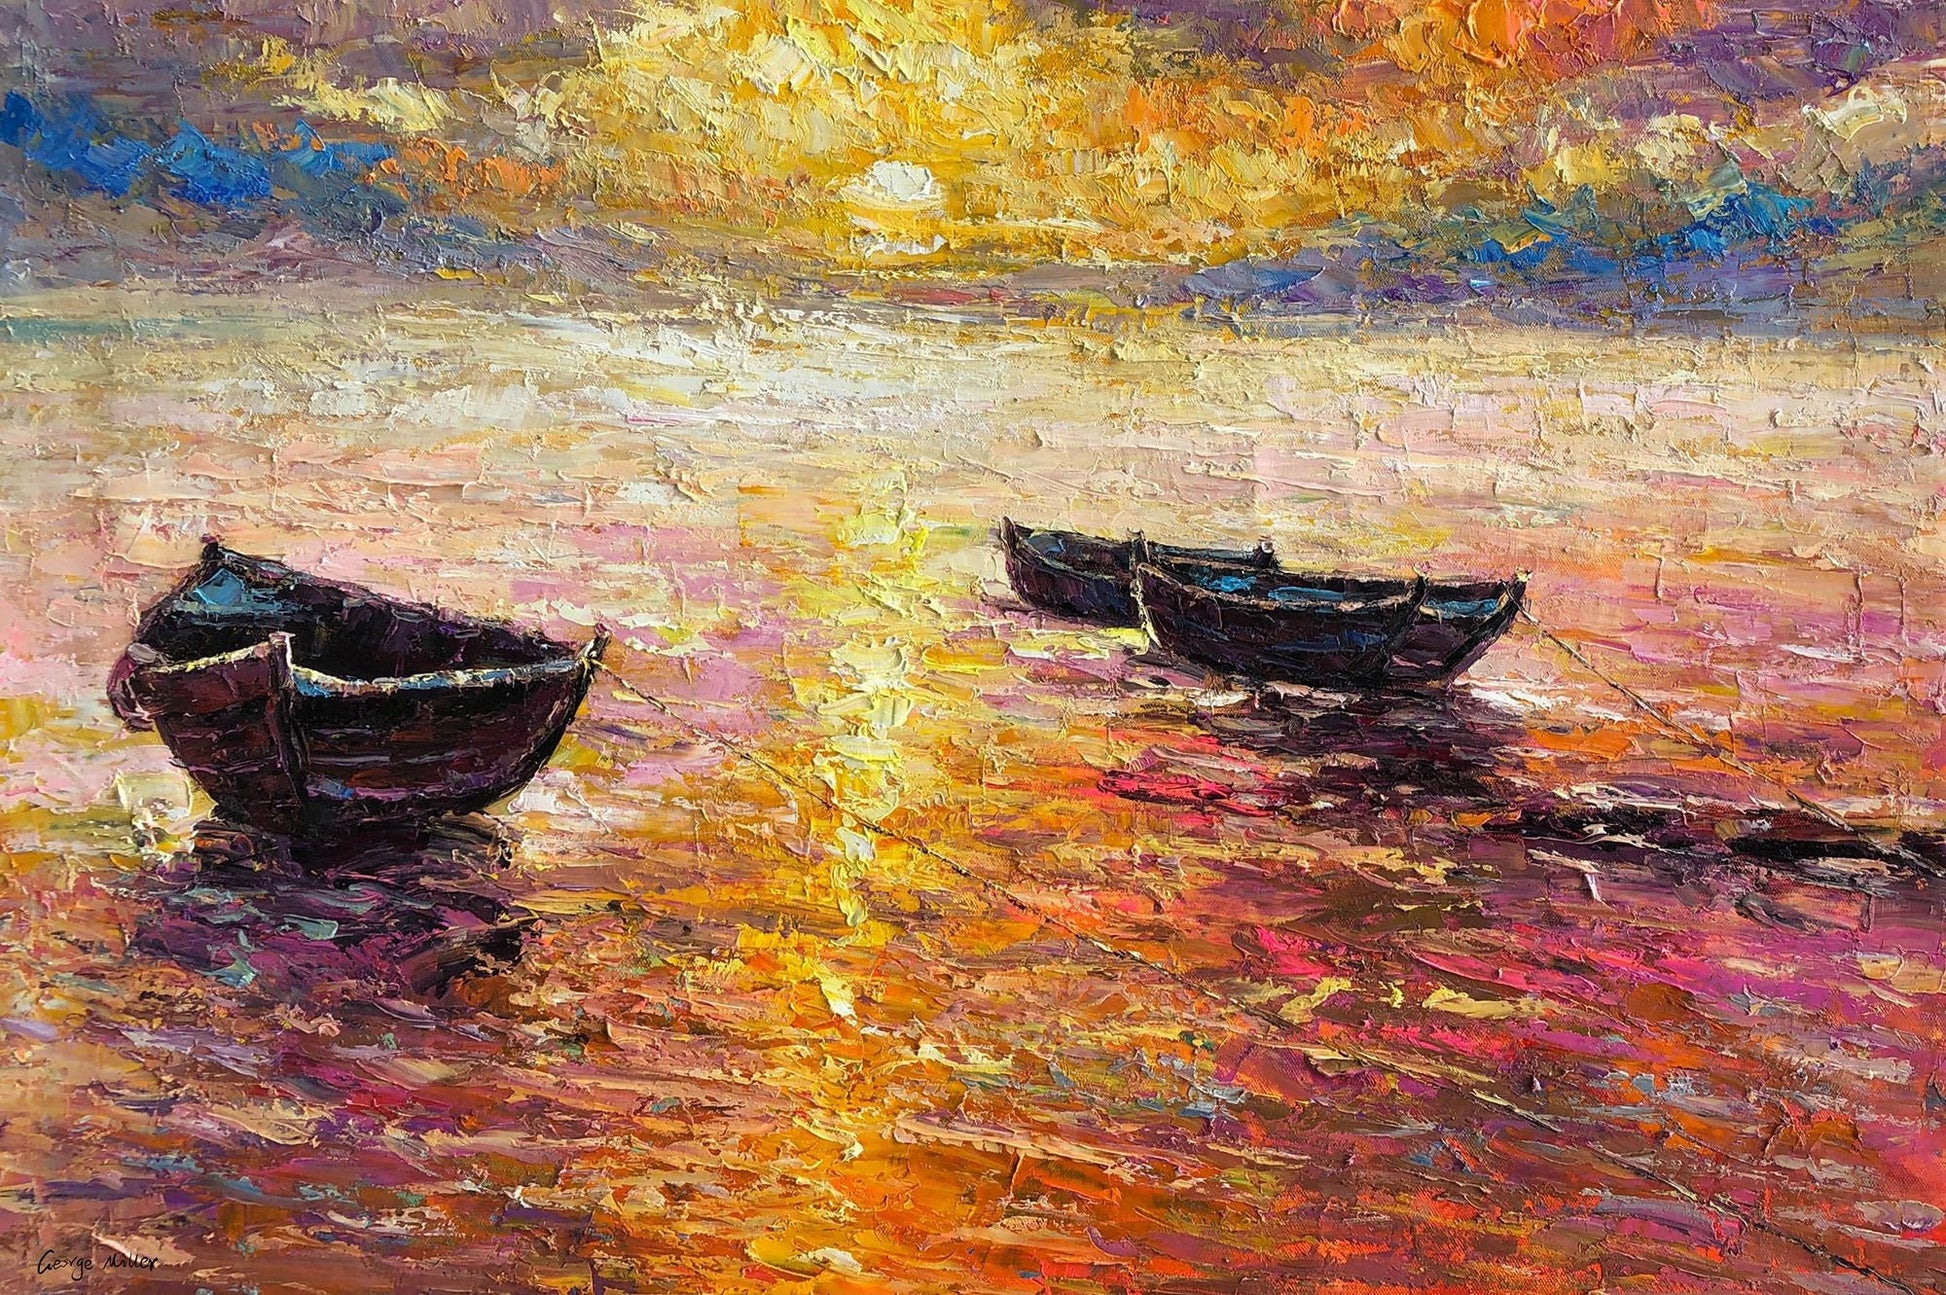 Fishing Boat at Dawn: Large Wall Decor | Original Oil Painting | Seascape Art, Oil Painting Abstract, Living Room Wall Décor